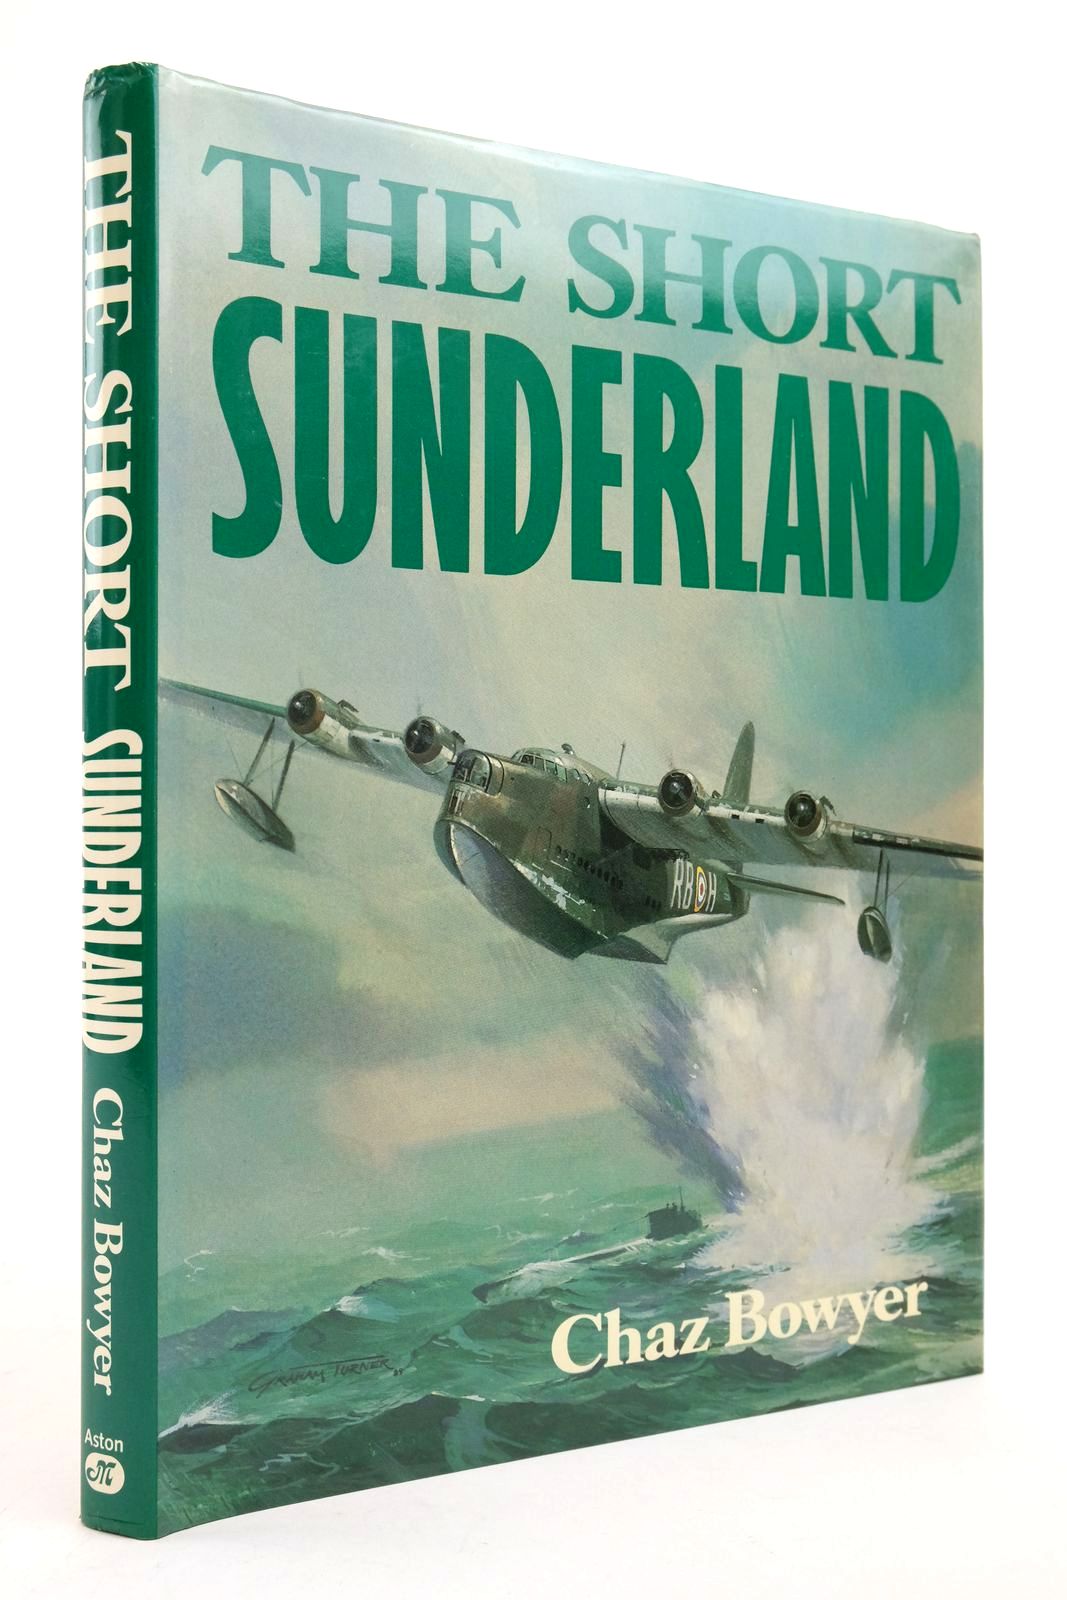 Photo of THE SHORT SUNDERLAND written by Bowyer, Chaz published by Aston Publications (STOCK CODE: 2139350)  for sale by Stella & Rose's Books